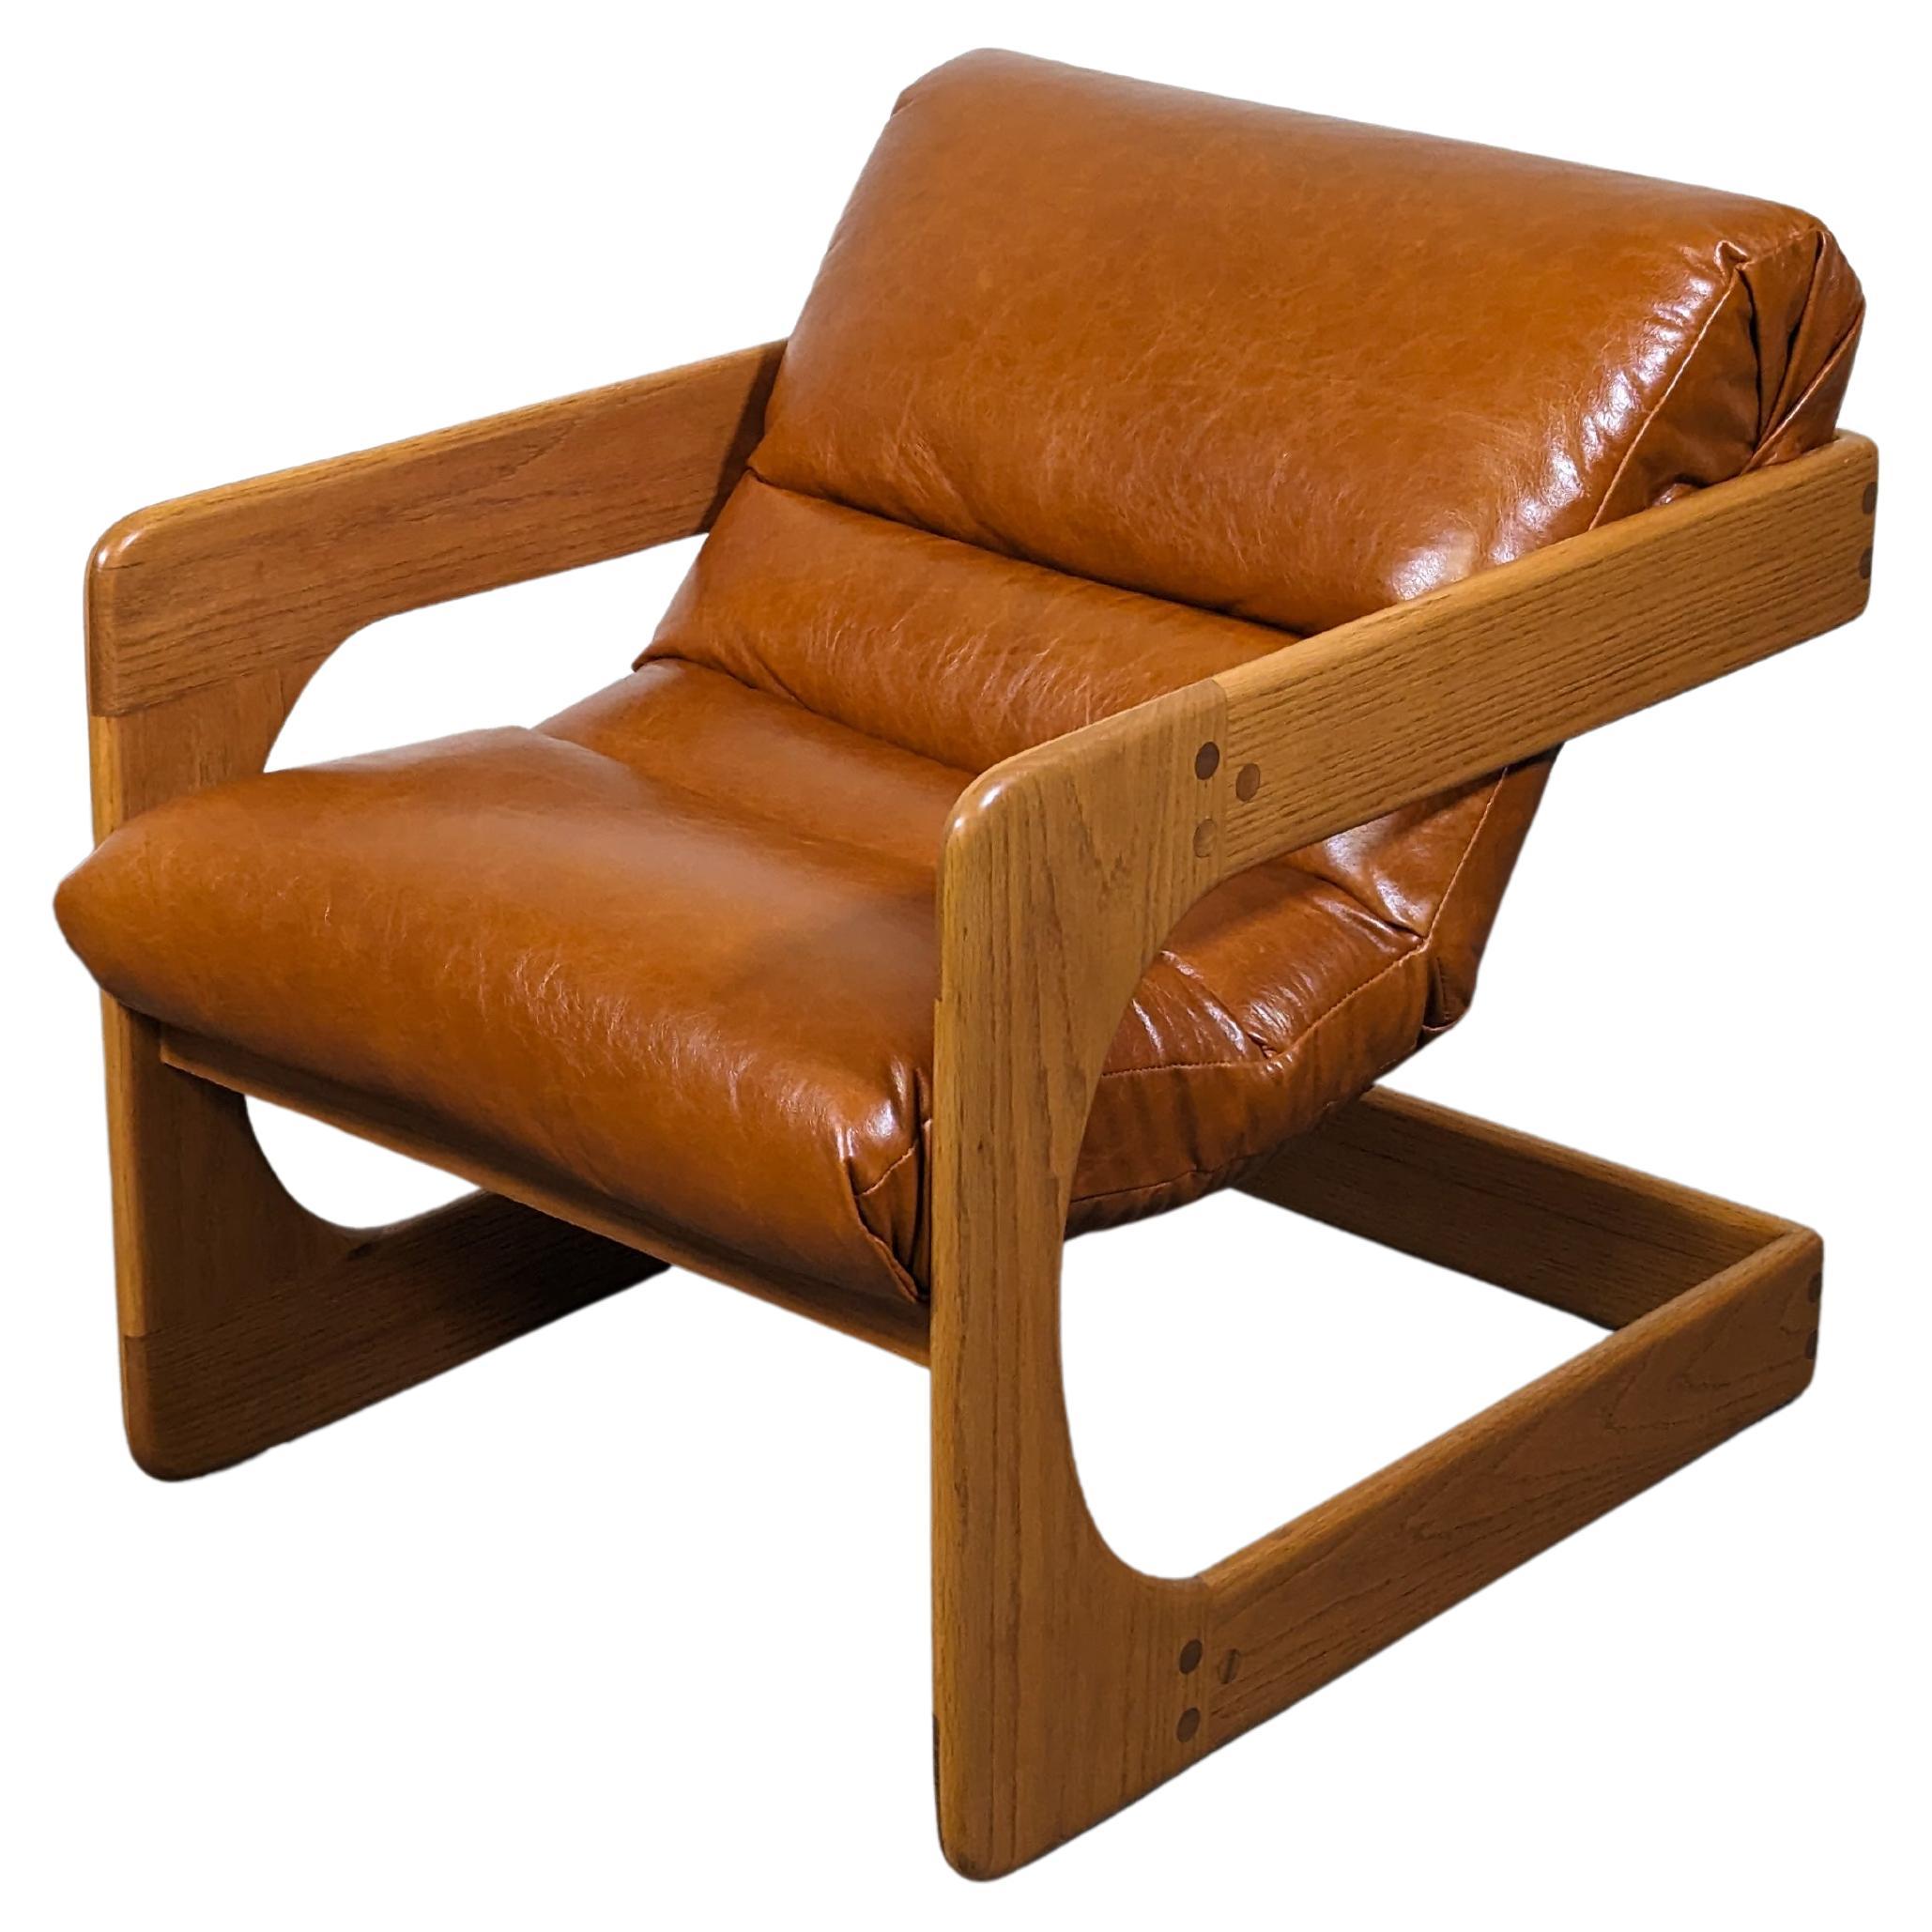 Mid Century Cantilevered Lounge Chair by Lou Hodges, Cognac Leather, 1970s